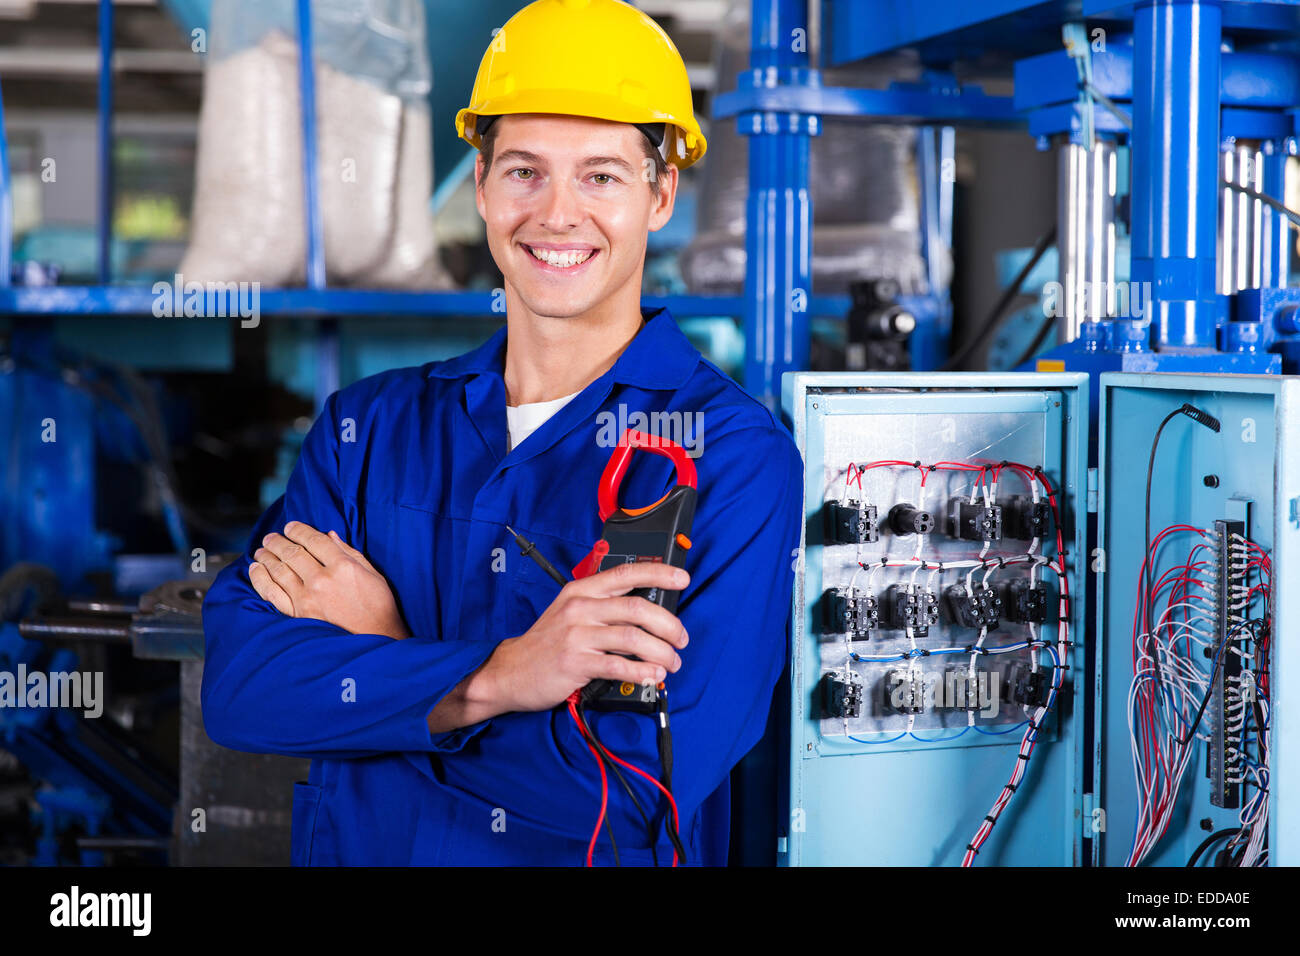 happy electrician holding digital insulation resistance tester Stock Photo